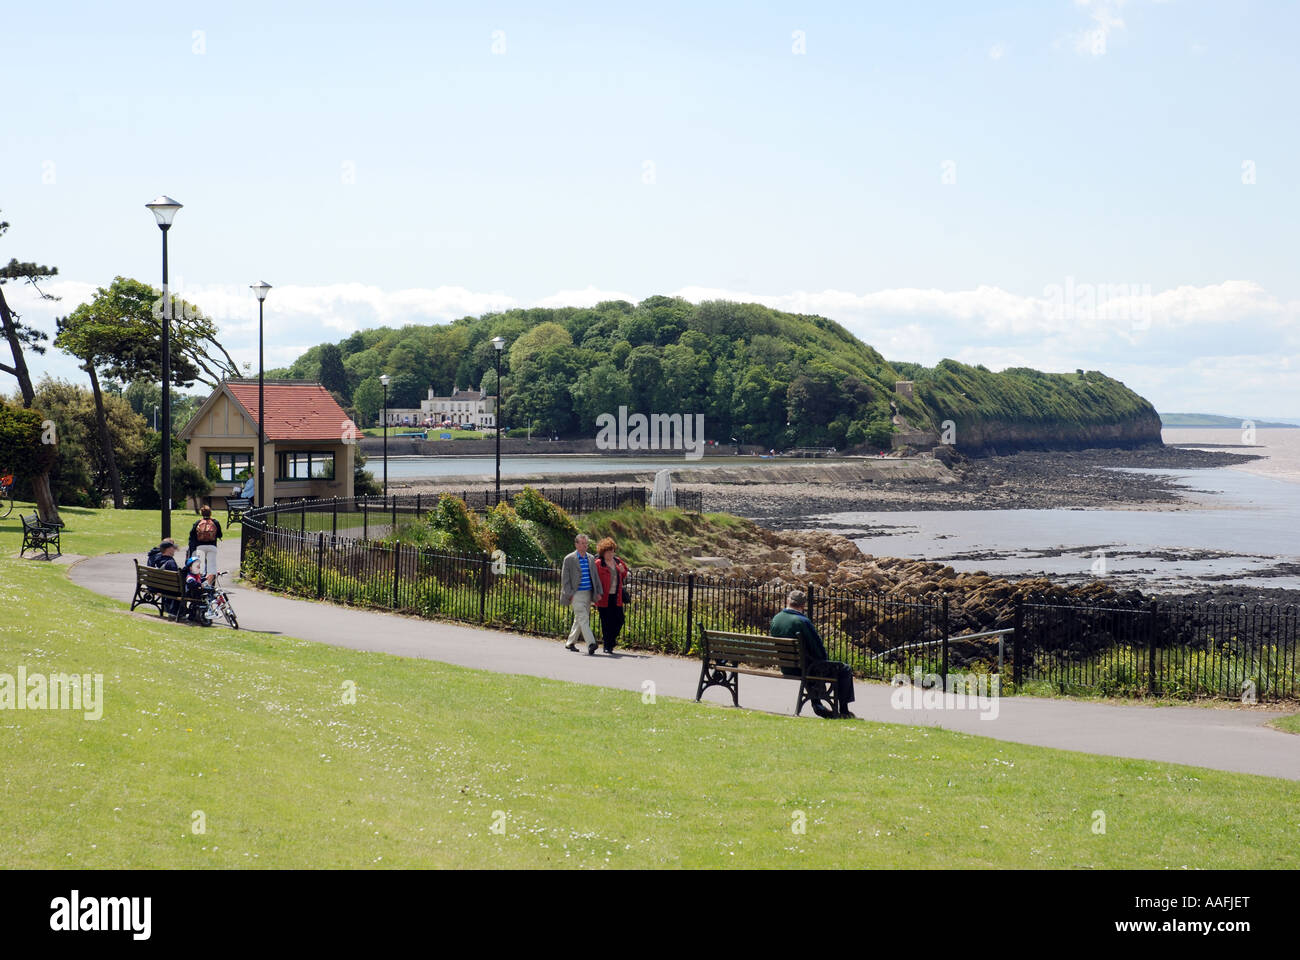 The sea front, Clevedon, Somerset, England, UK Stock Photo